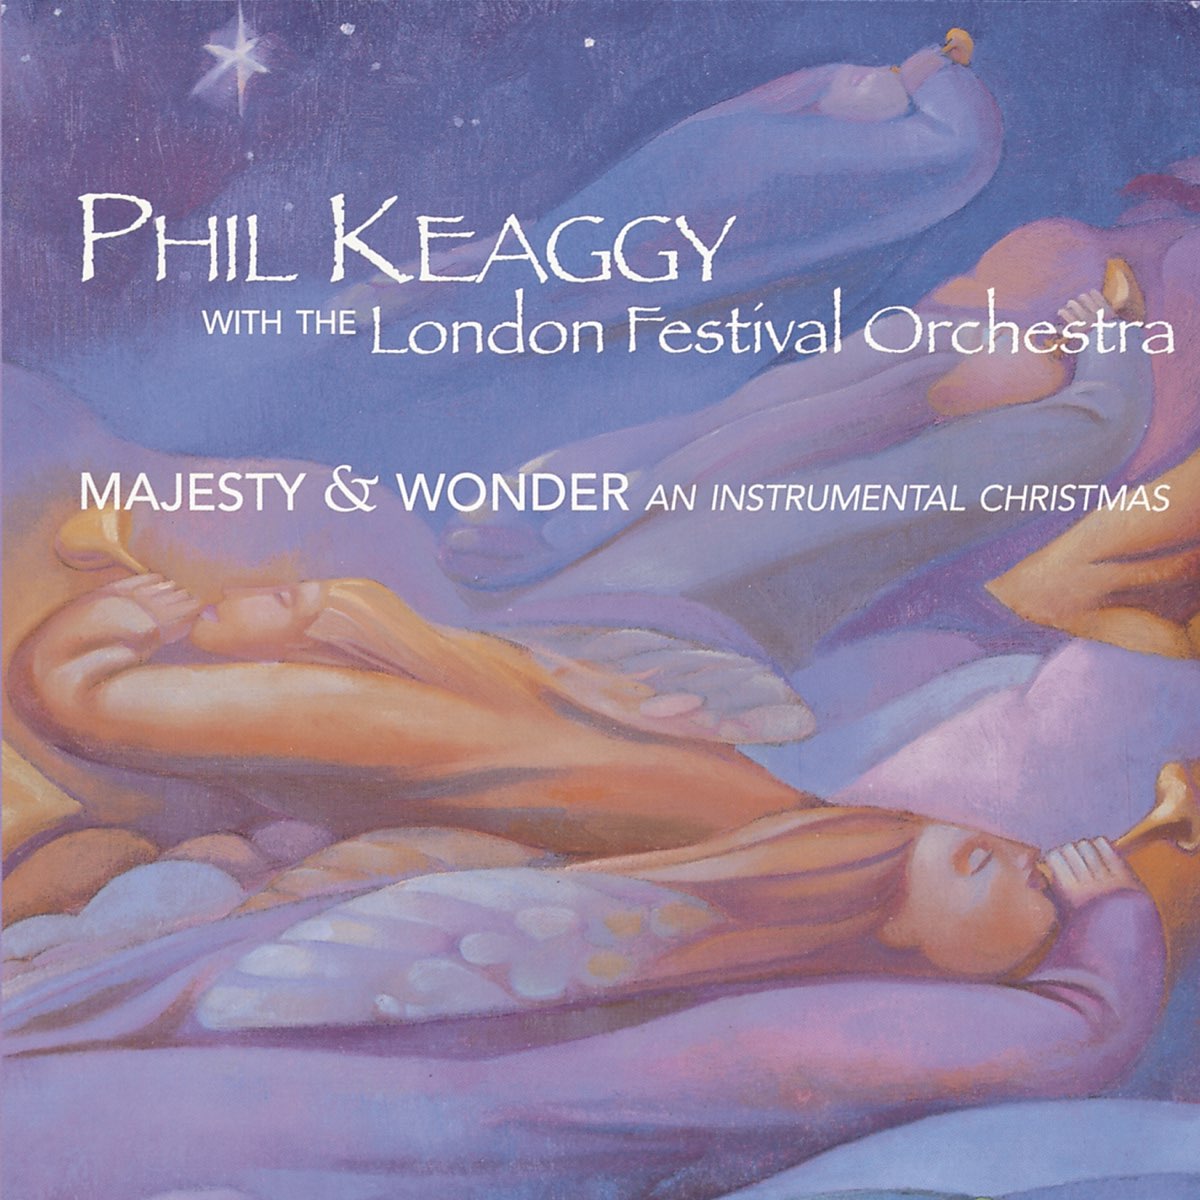 Majesty & Wonder - An Instrumental Christmas by Phil Keaggy on Apple Music